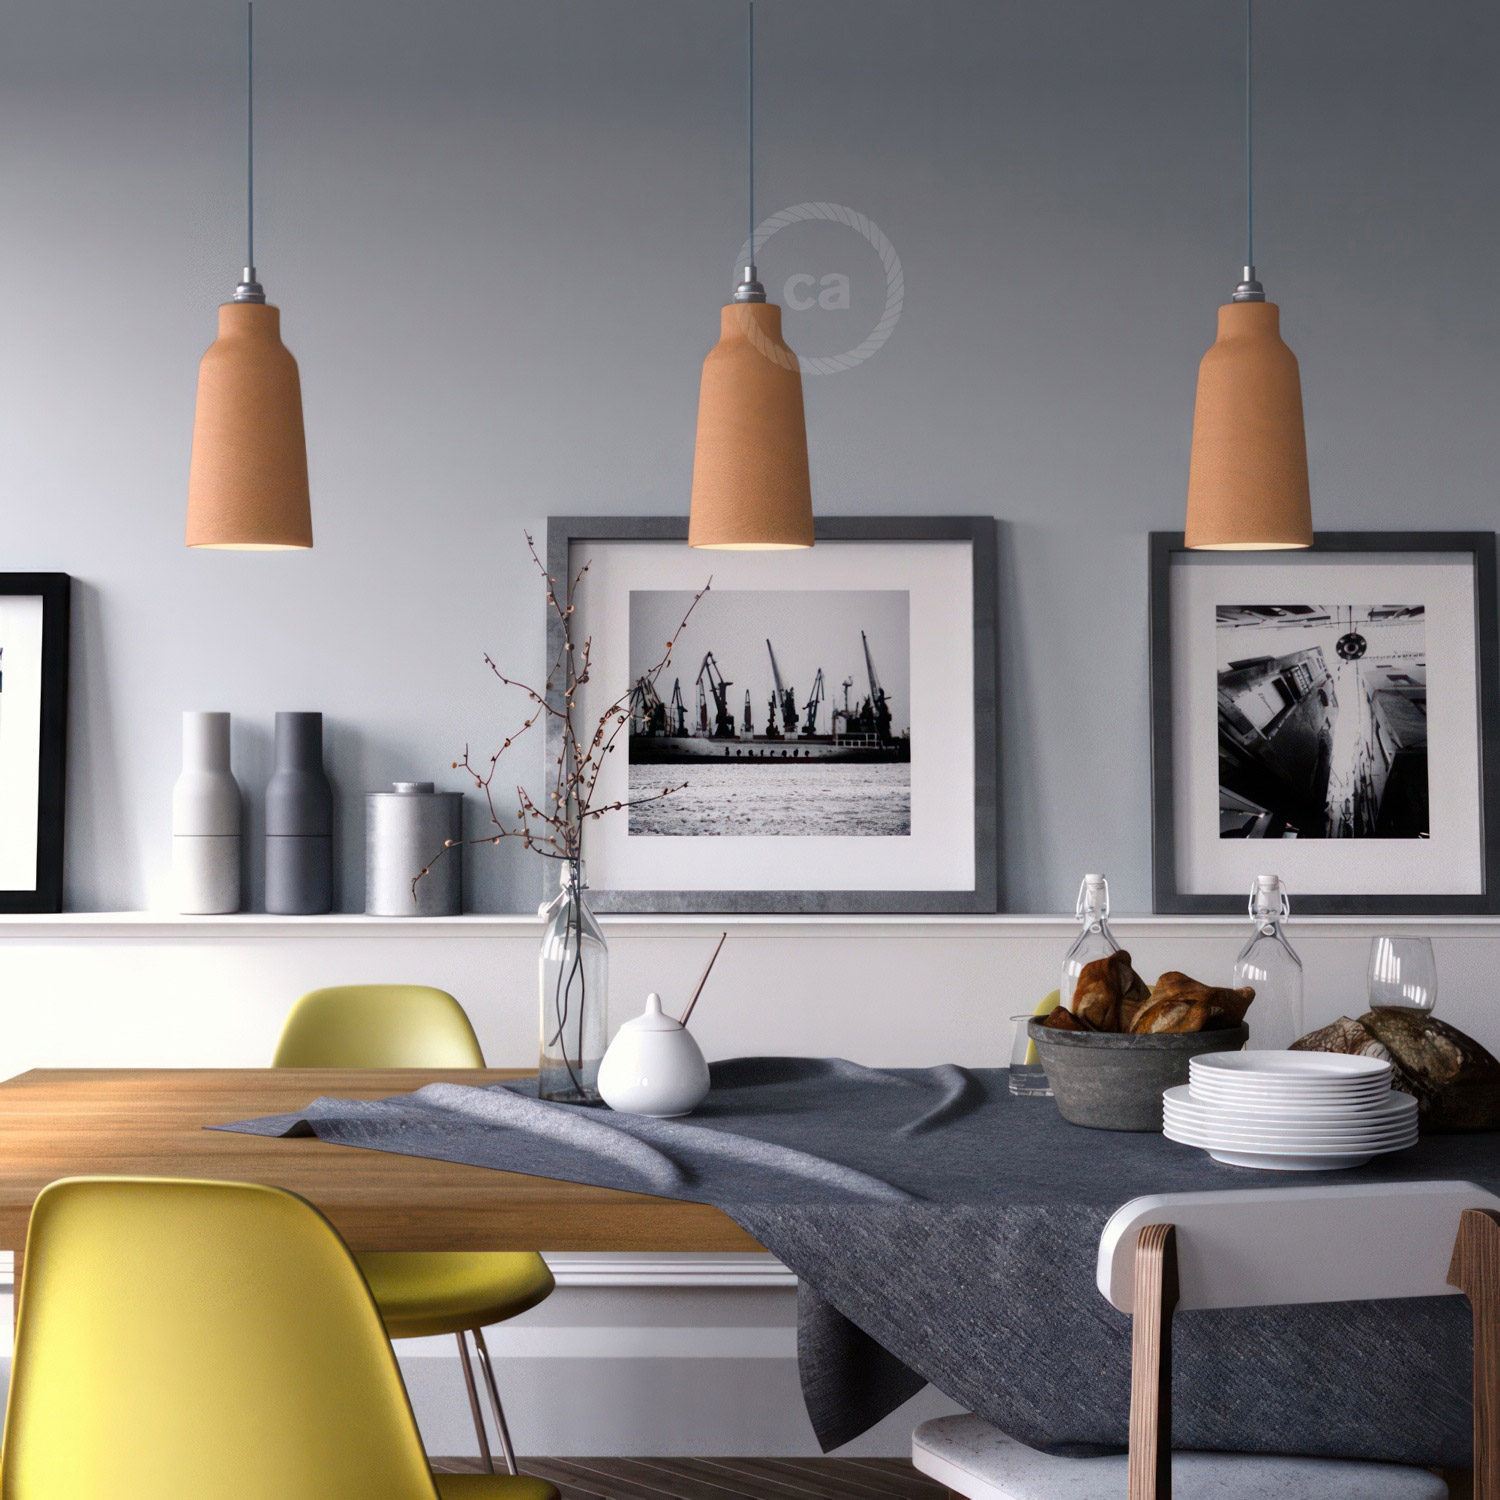 The Materia Collection | Tall Pendant Lampshade